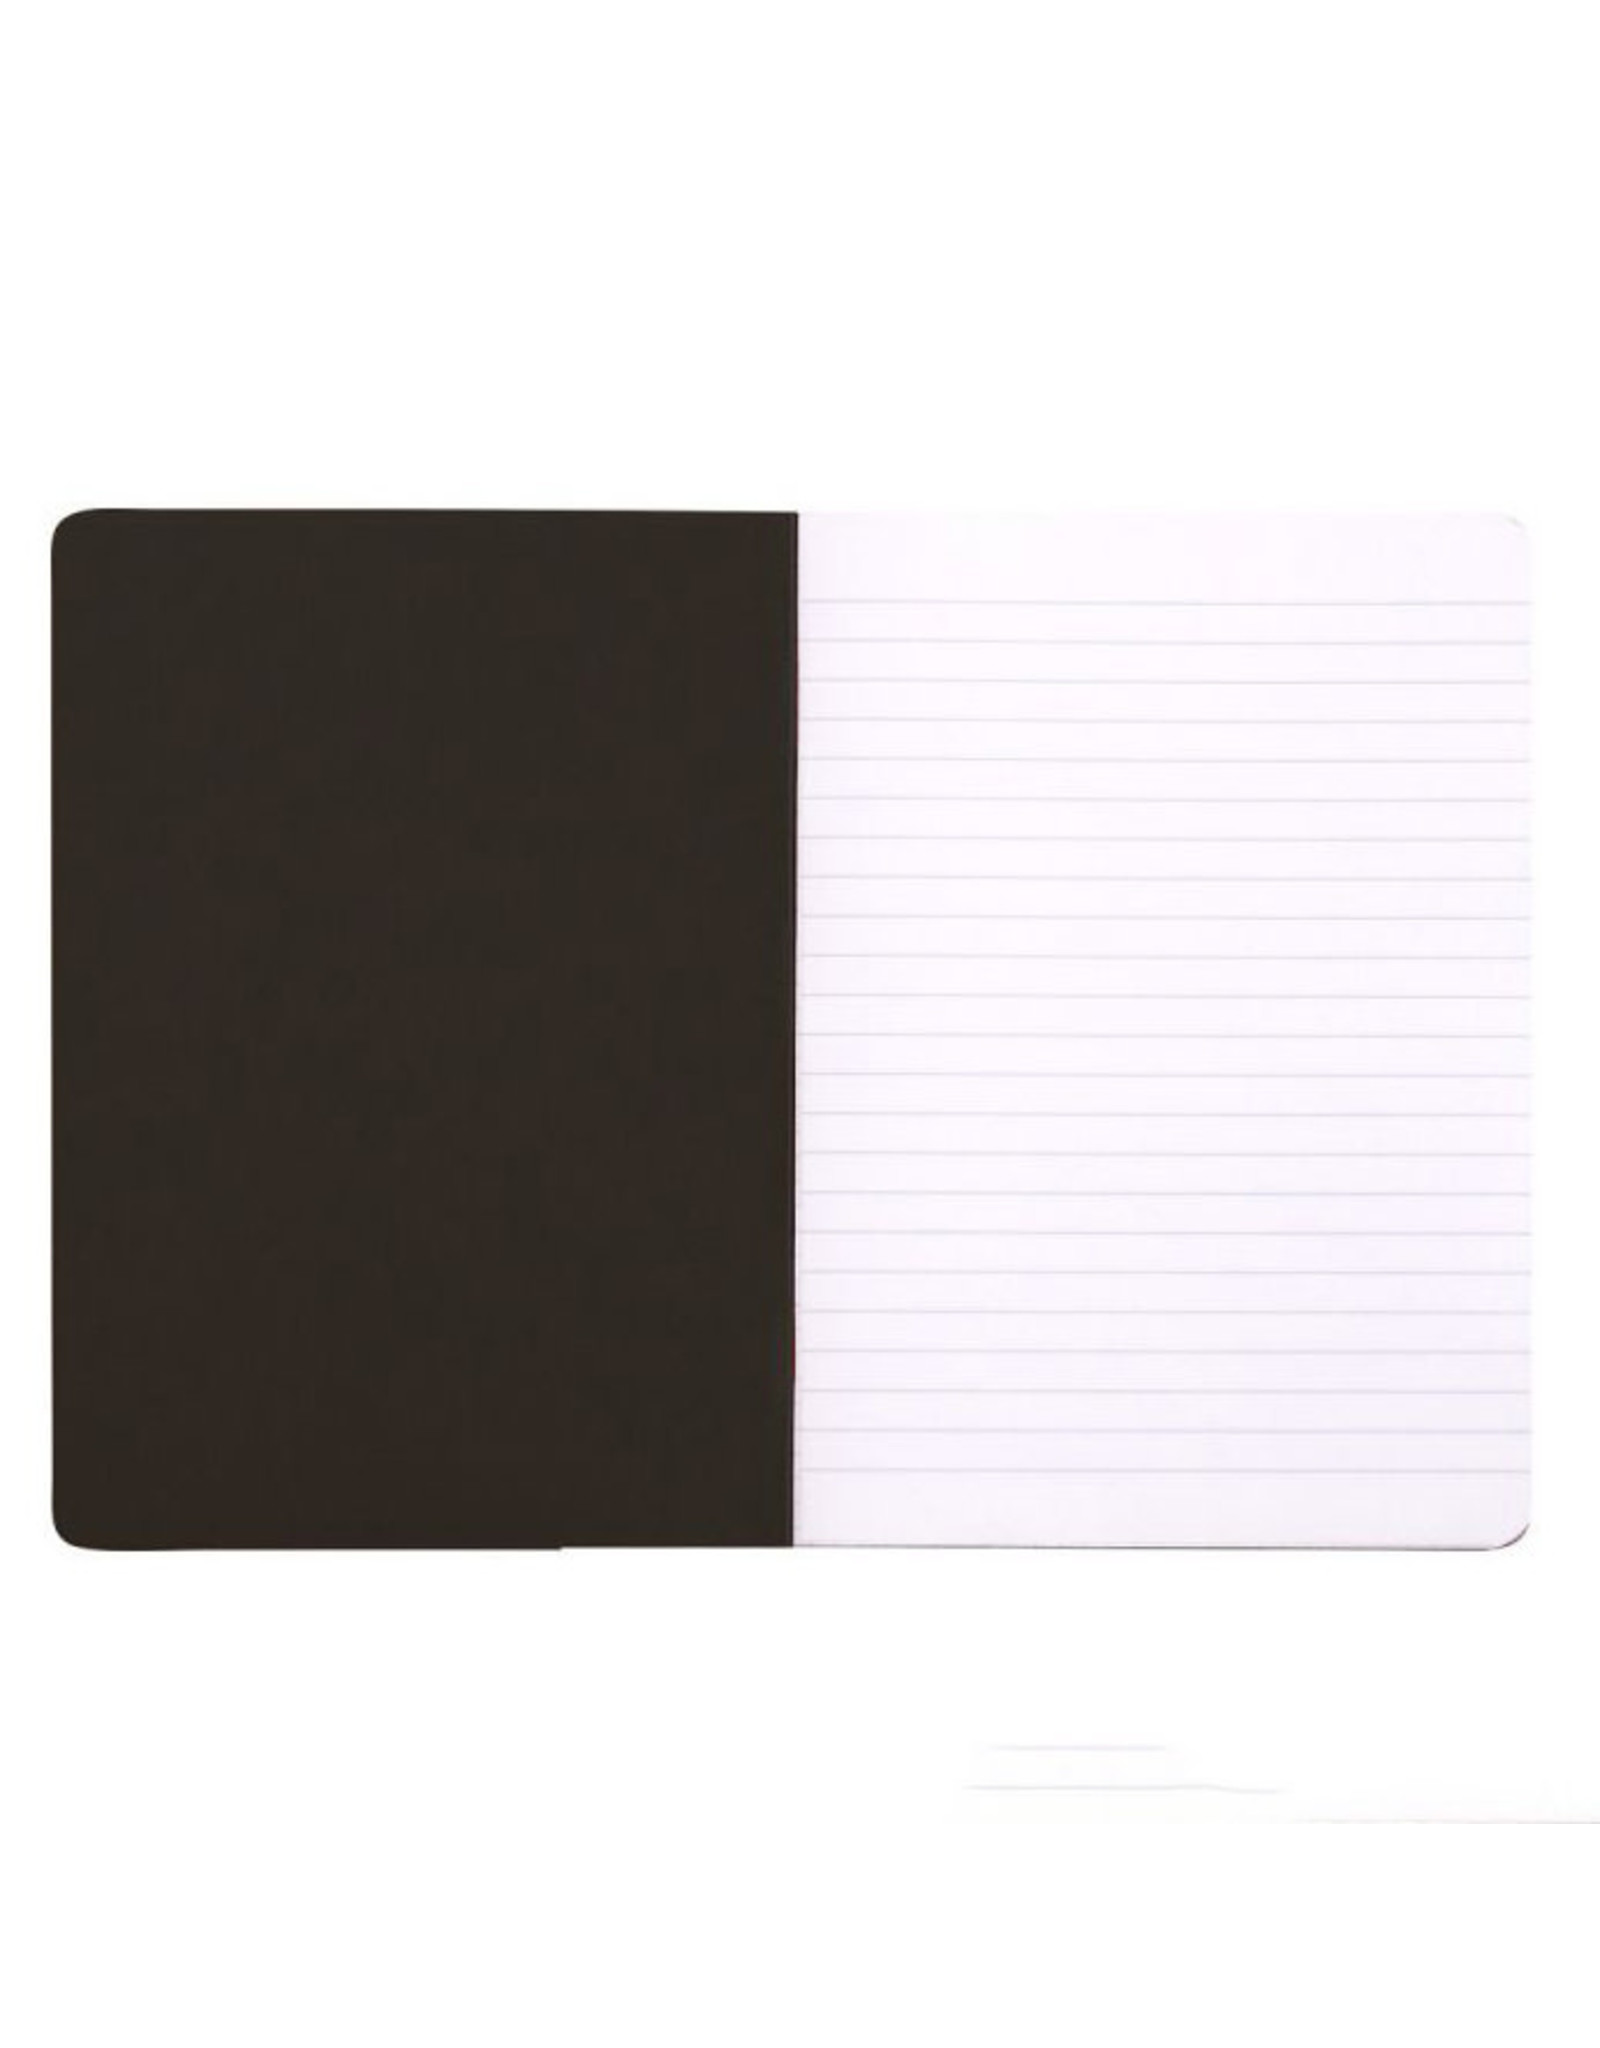 Rhodia Black Lined Classic Notebook 6 x 8.25